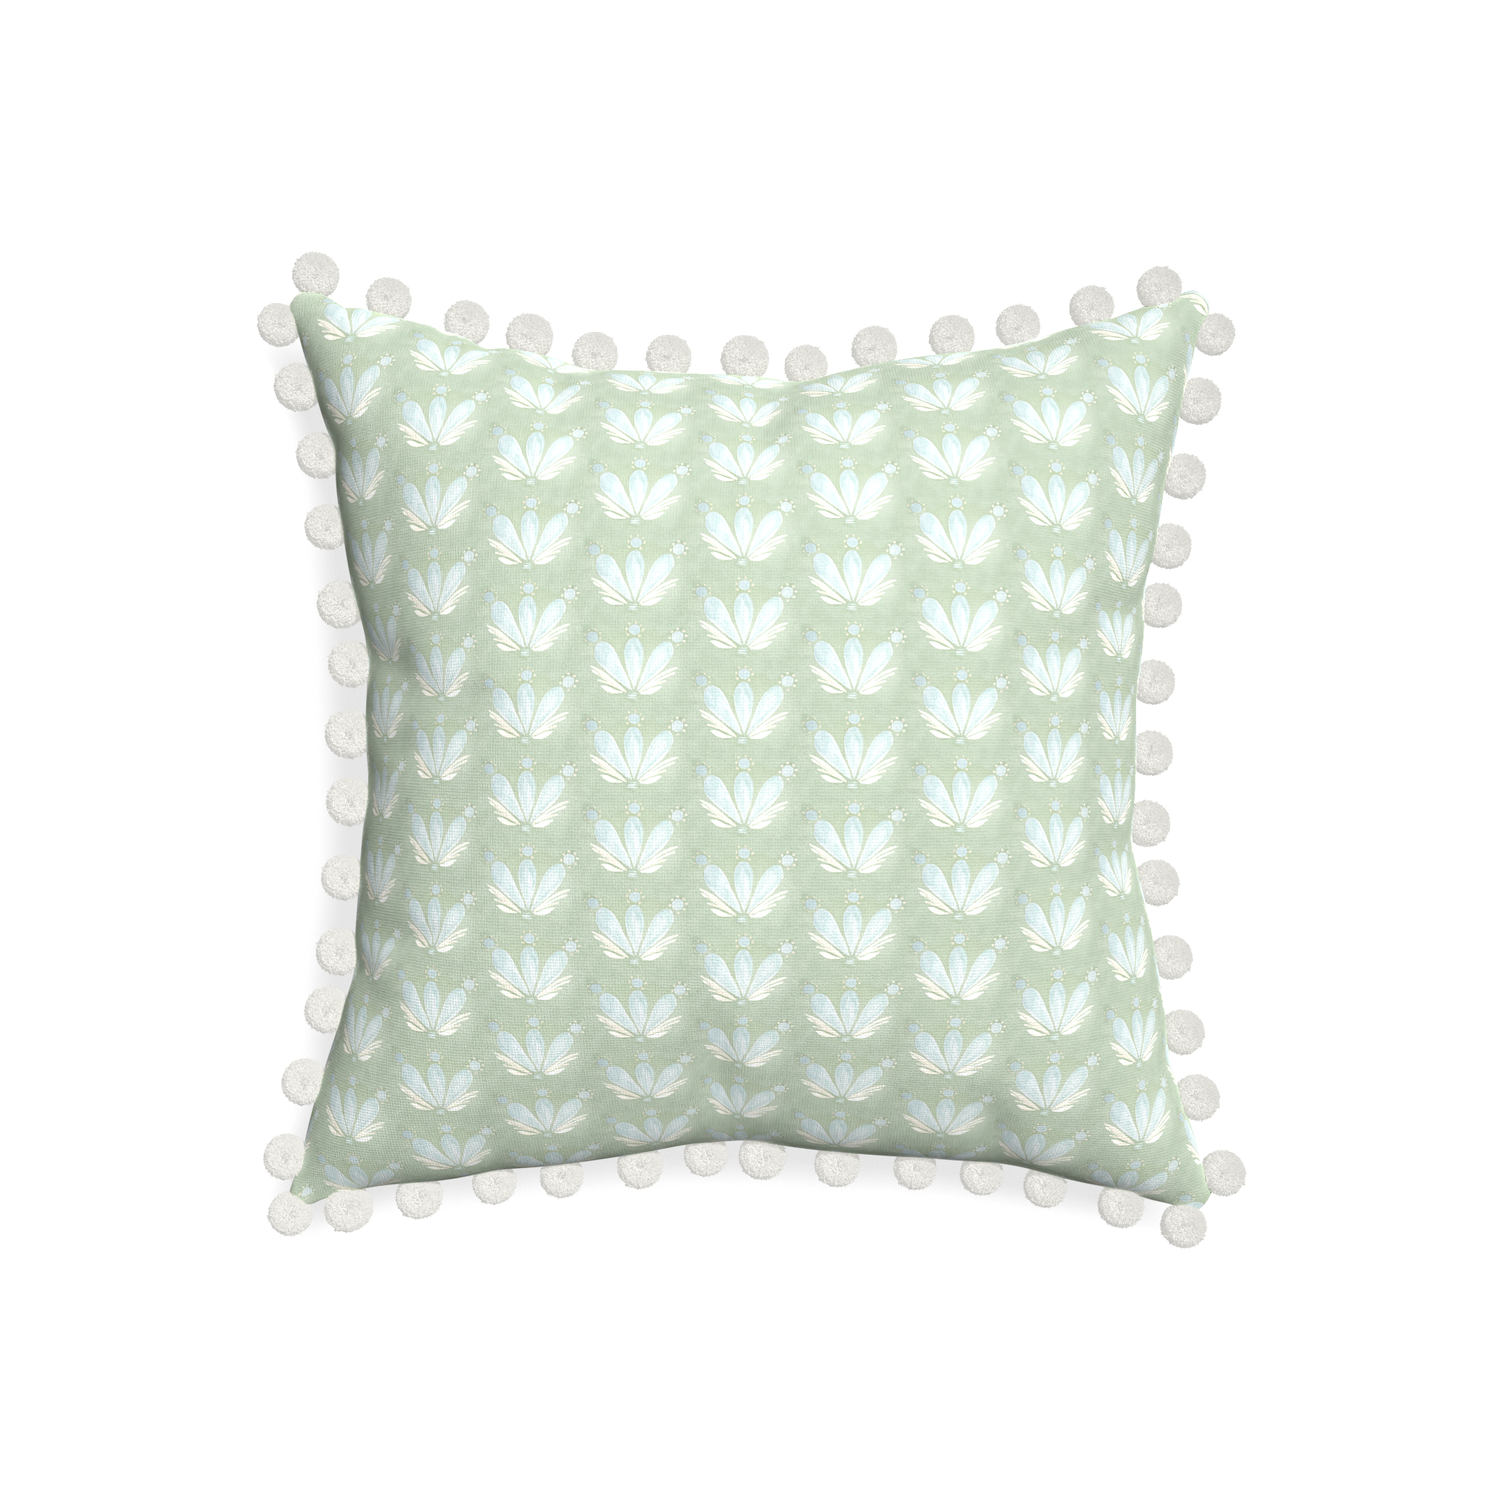 20-square serena sea salt custom blue & green floral drop repeatpillow with snow pom pom on white background